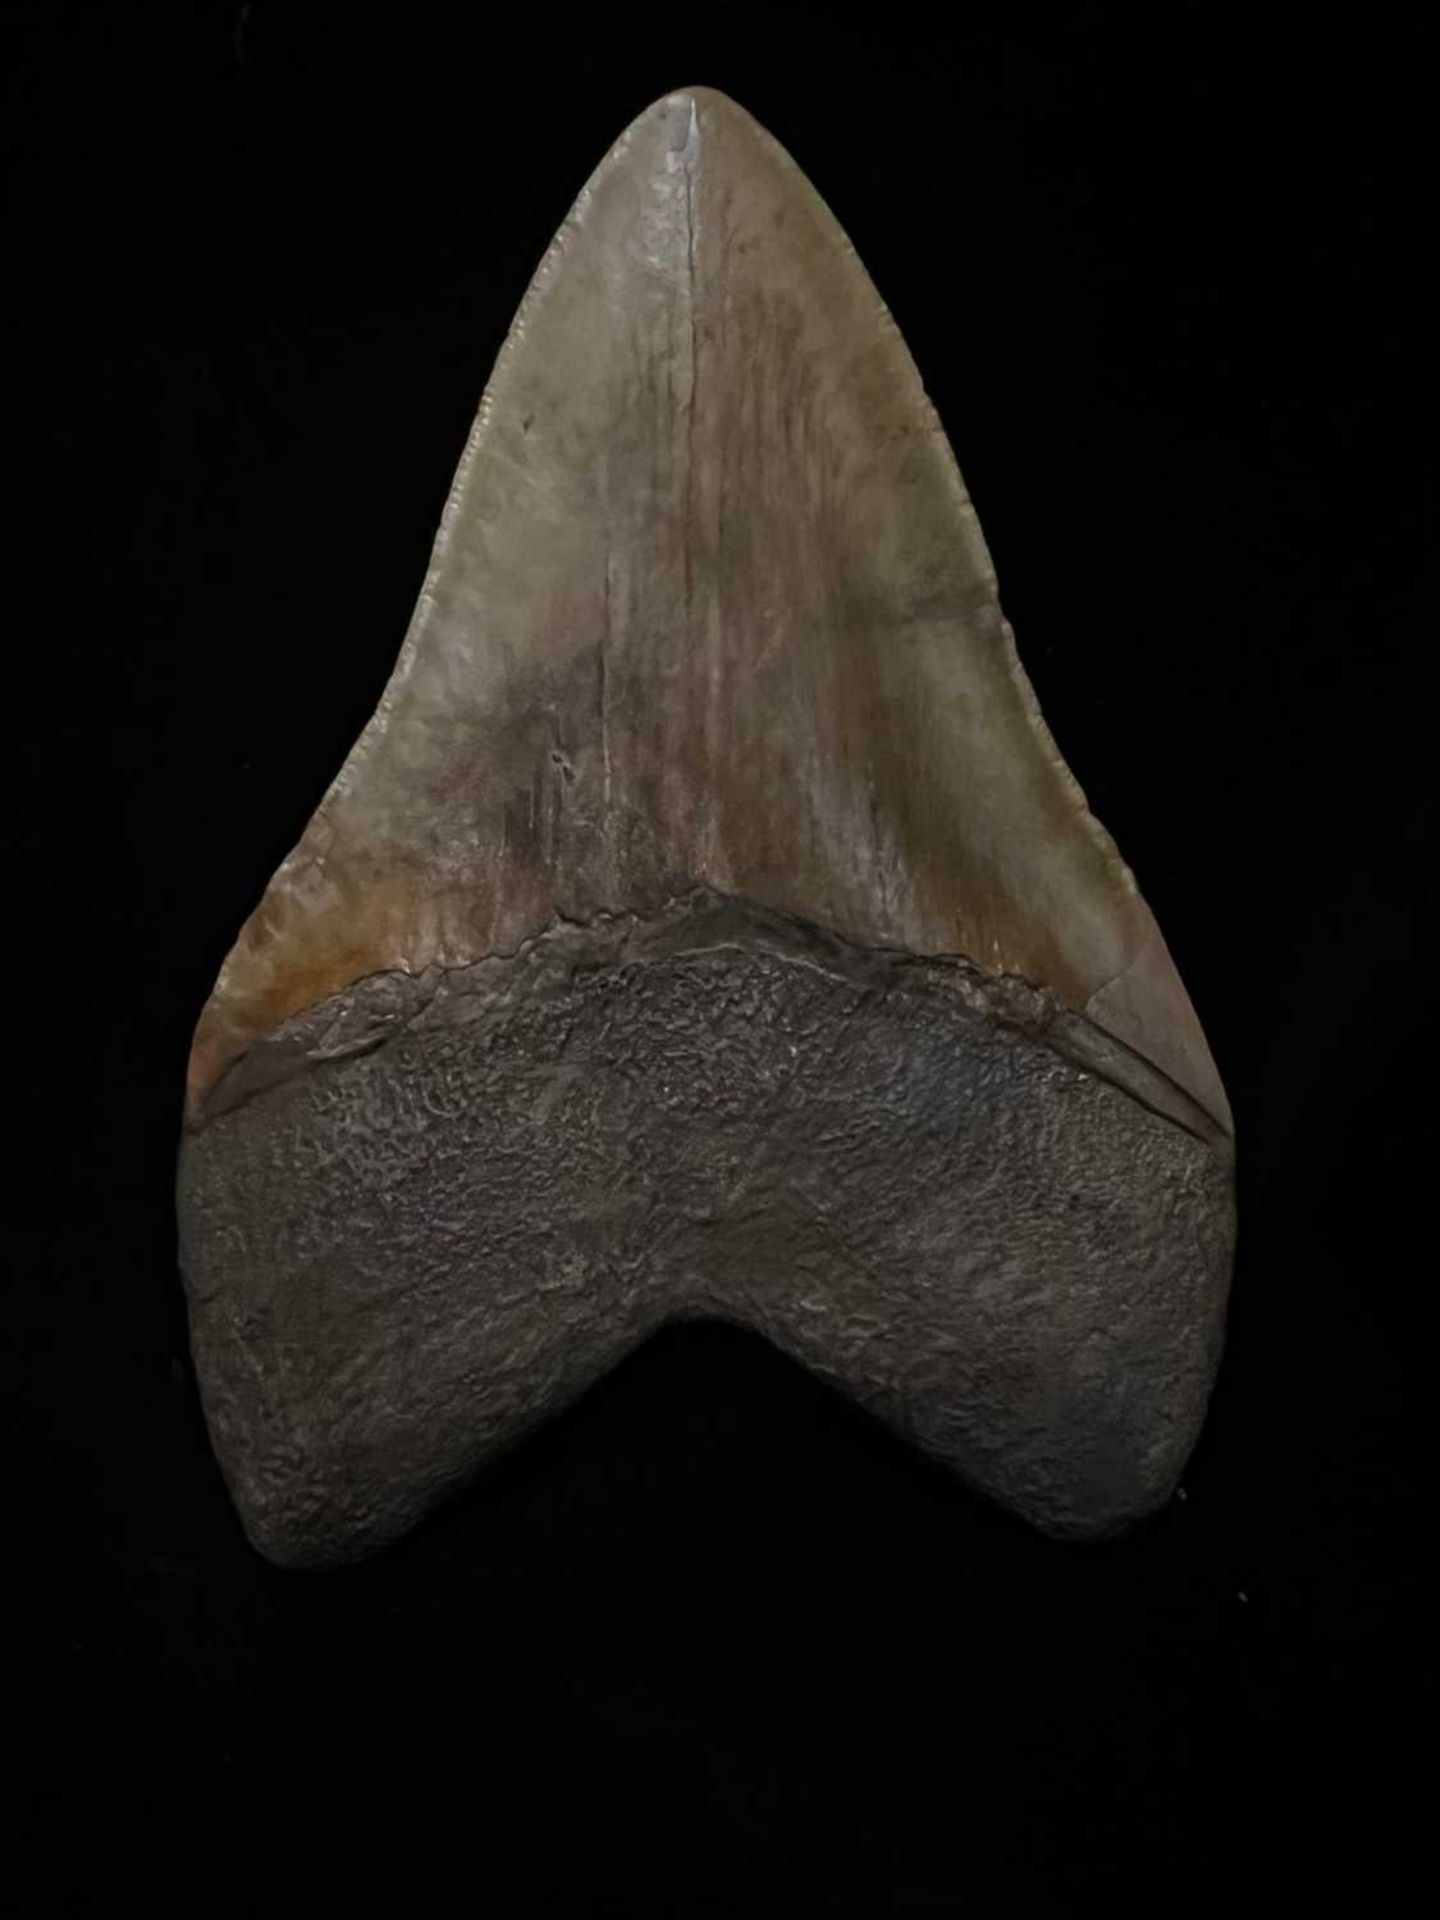 AN EXTINCT FOSSILISED MEGALODON SHARK TOOTH - Image 5 of 5